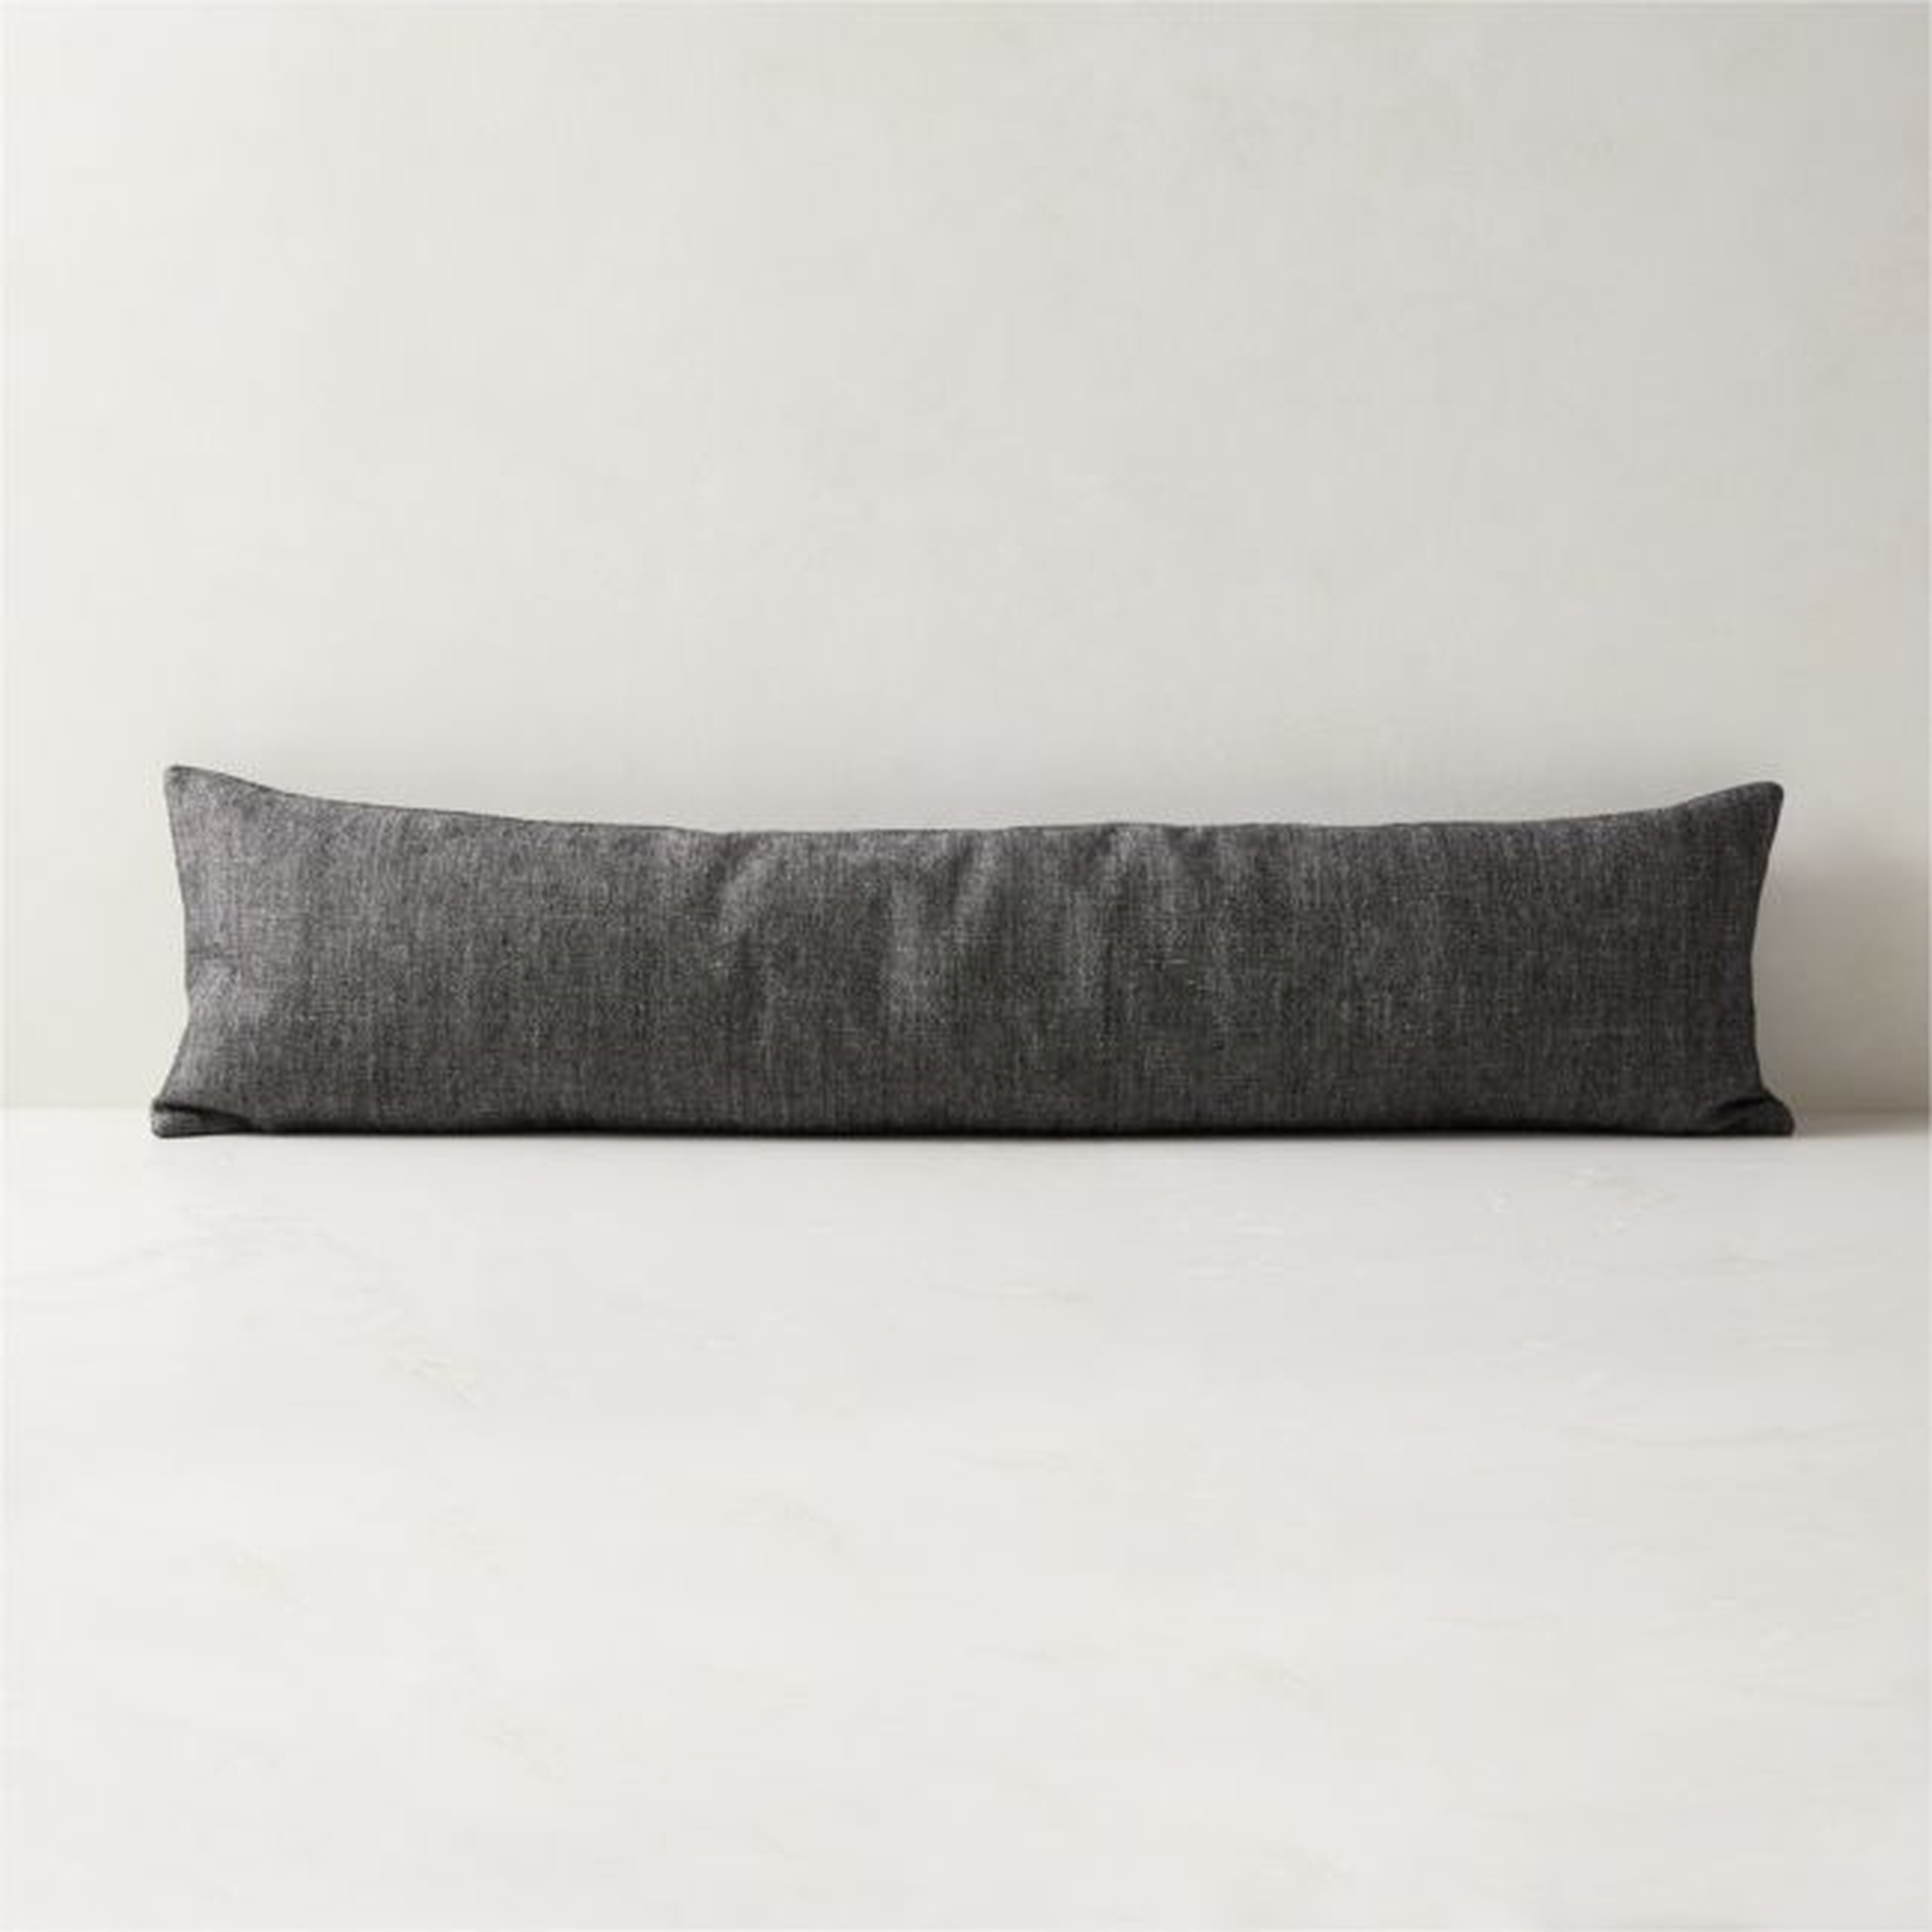 48"x12" Stonewash Grey Linen Pillow With Feather-Down Insert - CB2